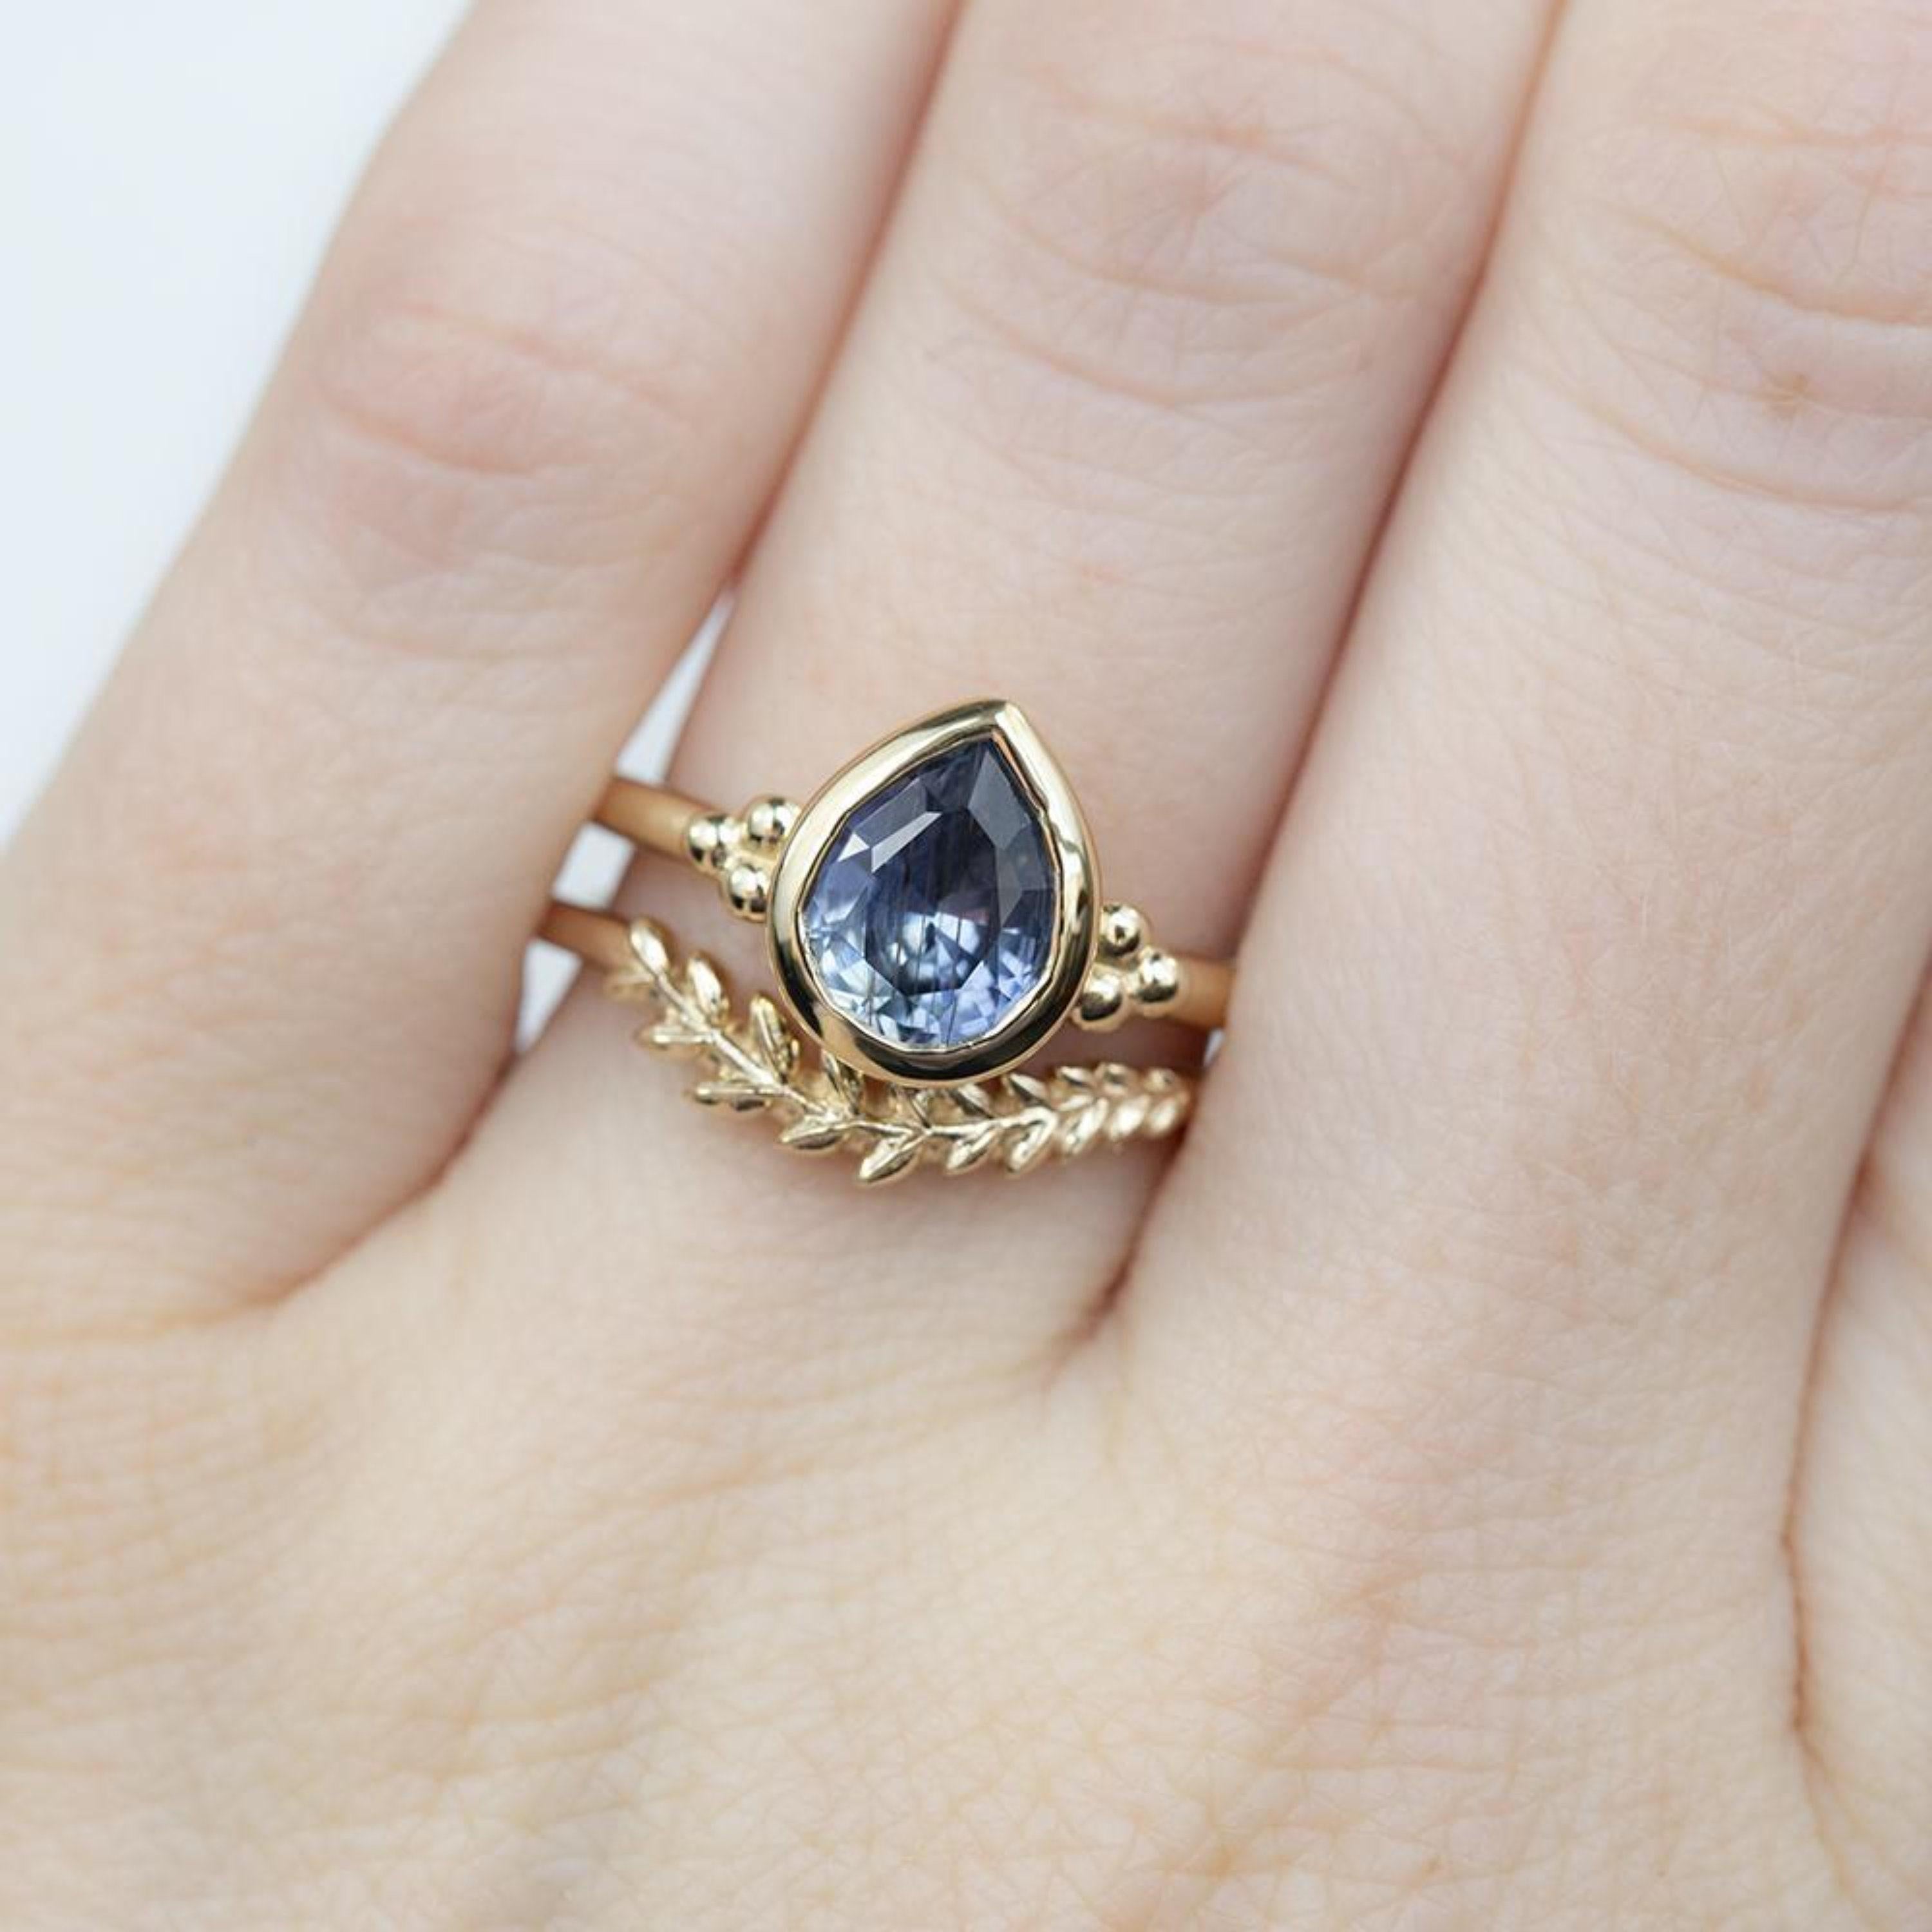 For Sale:  2 Carat Pear Cut Sapphire Low Bezel Engagement Ring Halo Sapphire Wedding Ring 4